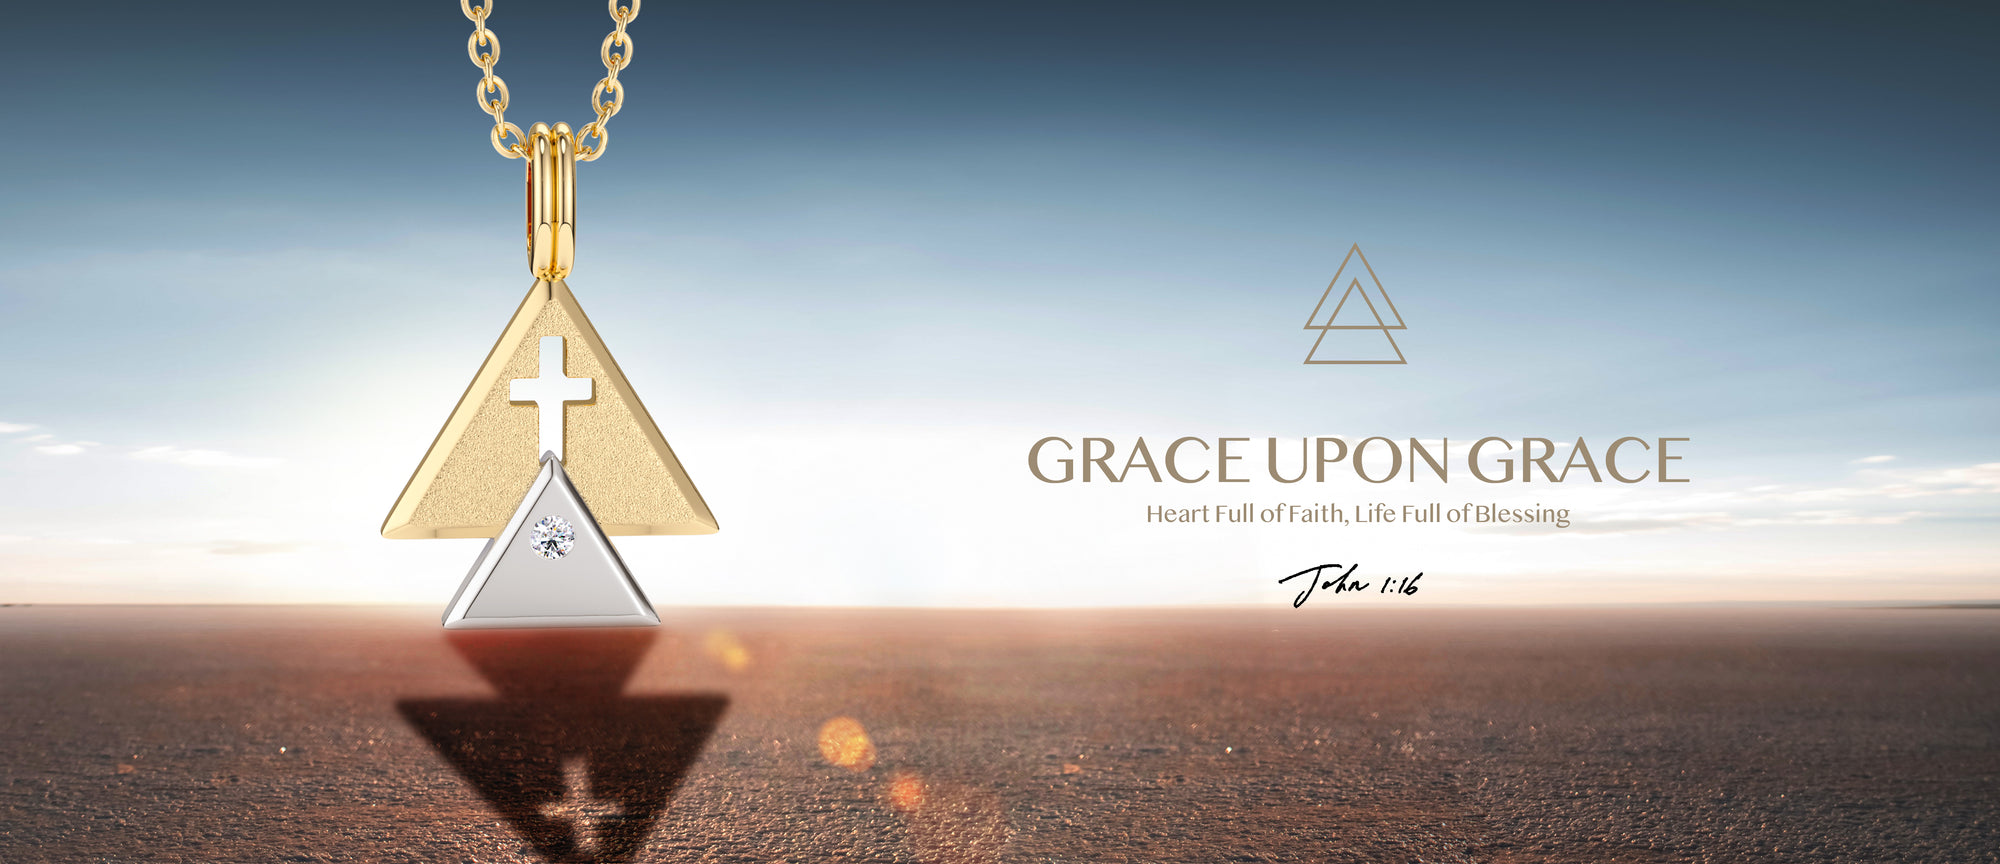 The Sacred Geometry and Profound Narrative Woven into "Grace Upon Grace"